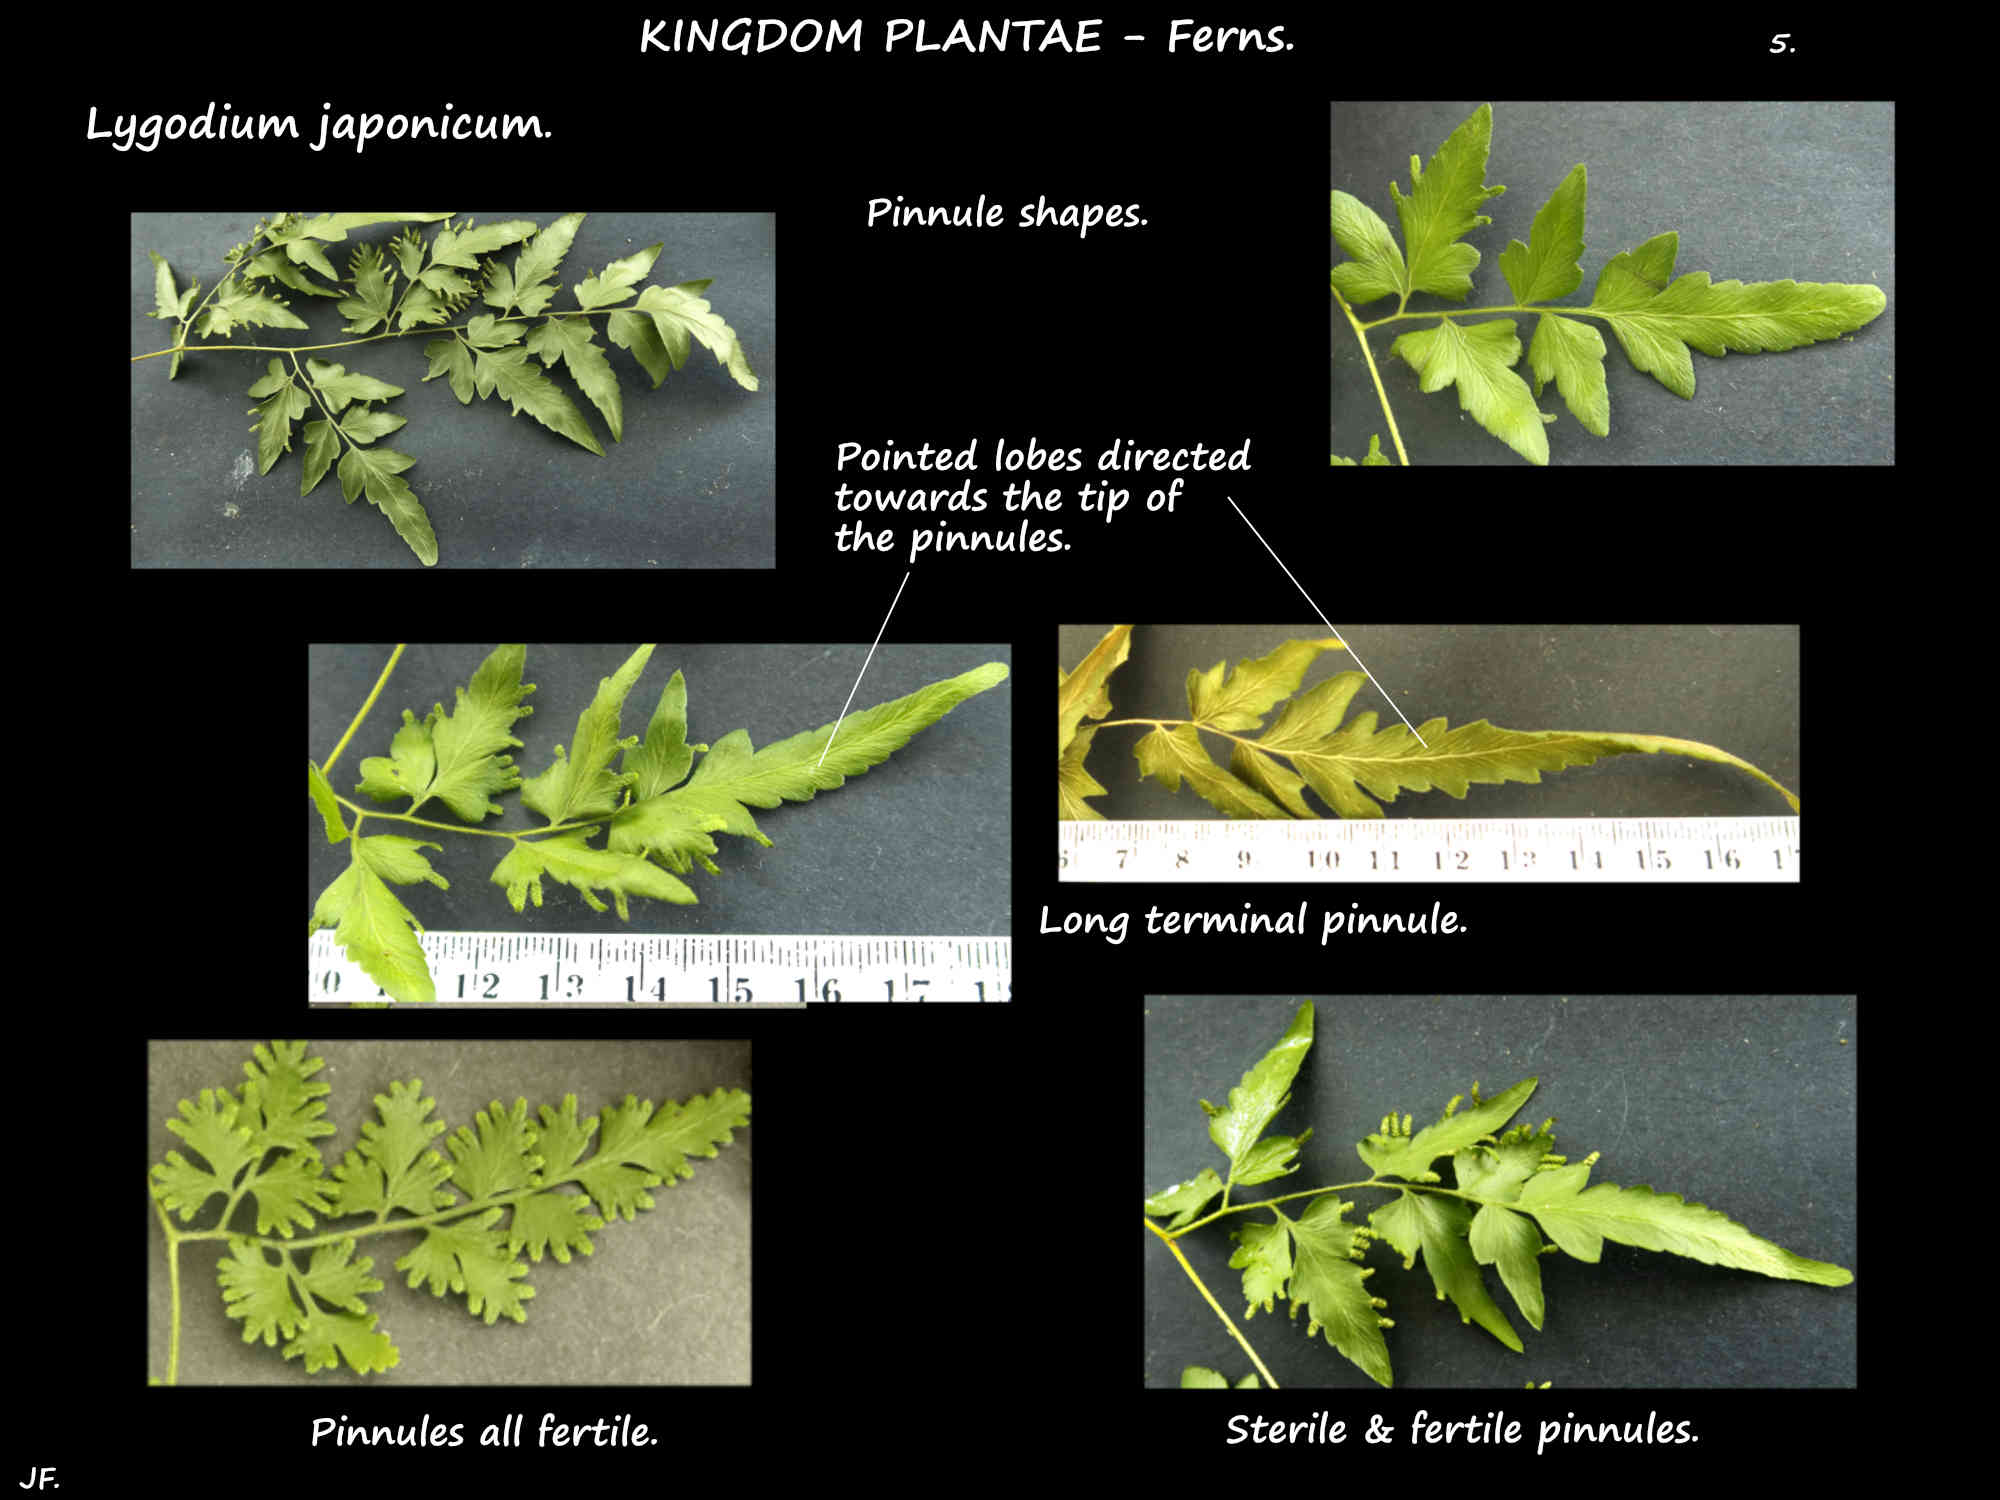 5 Different pinnule shapes of a Japenese climbing fern